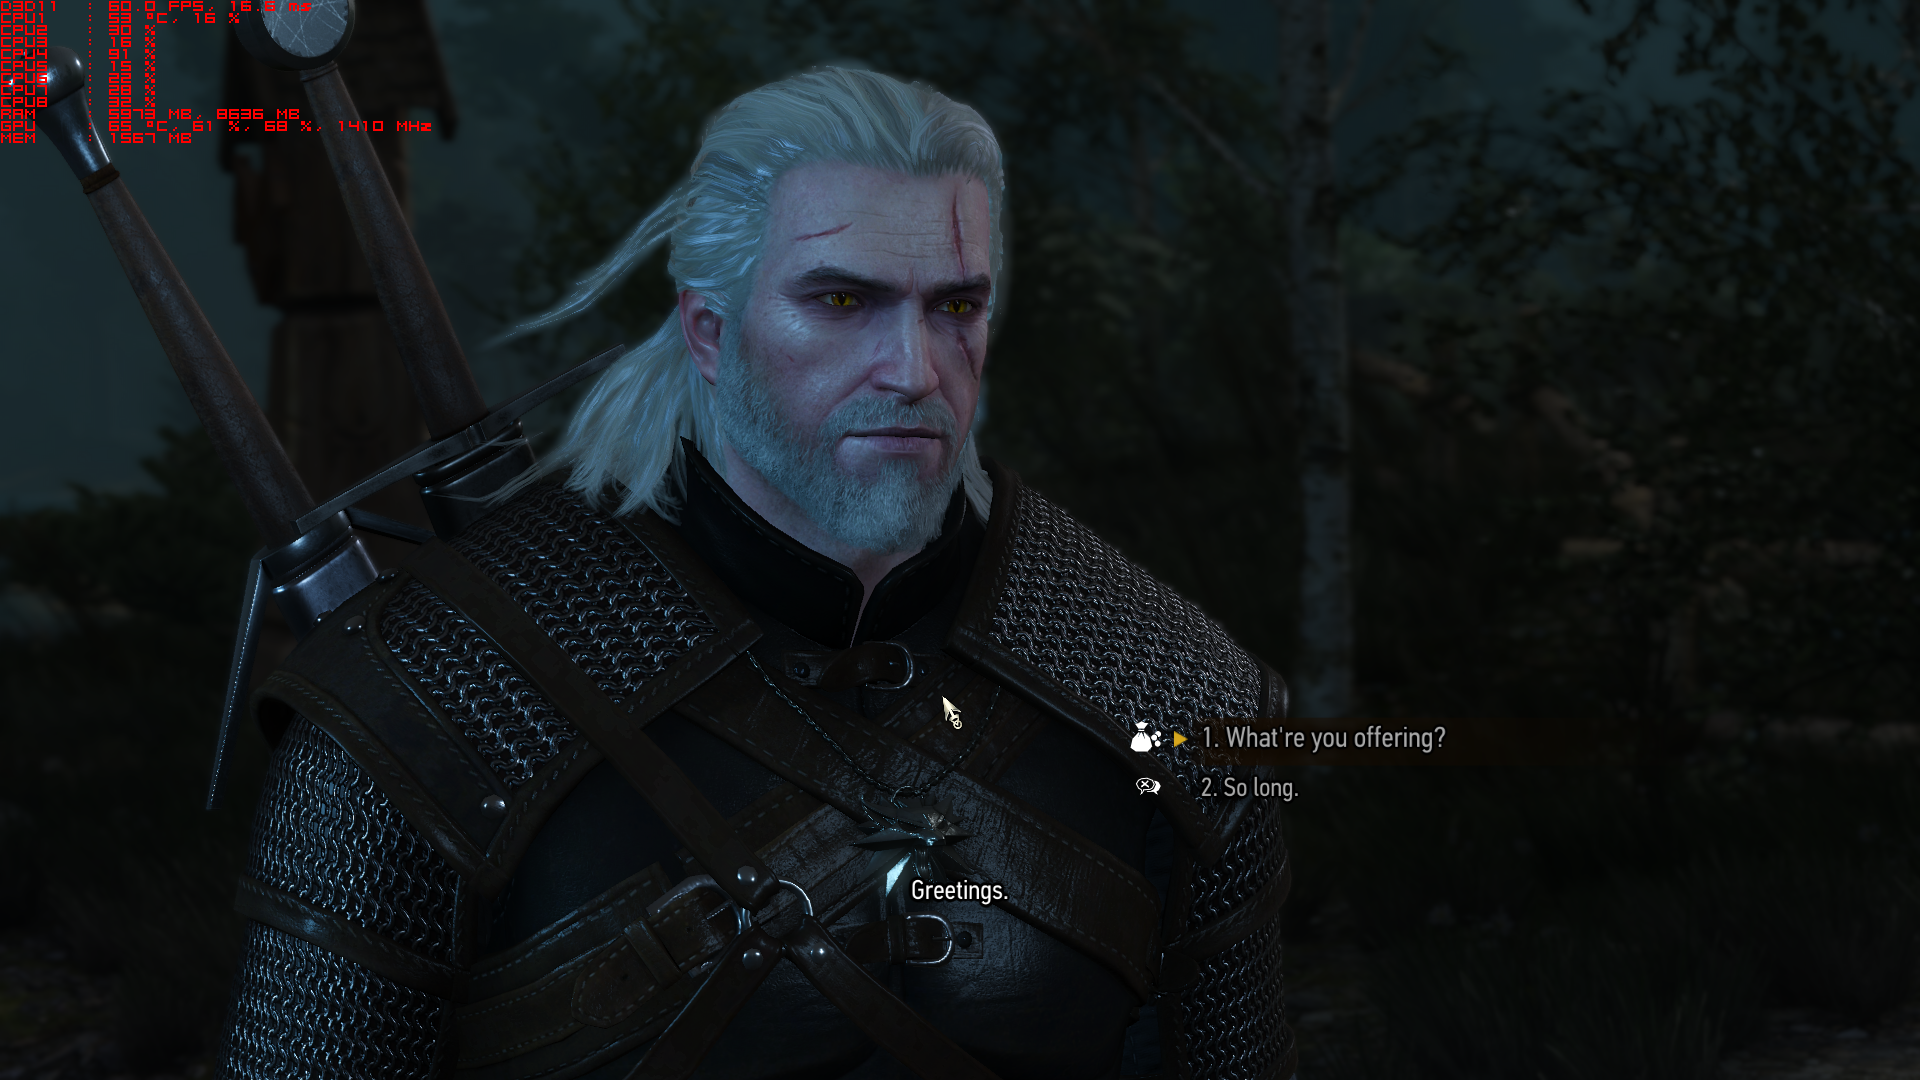 witcher3_2015_05_22_1arun0.png